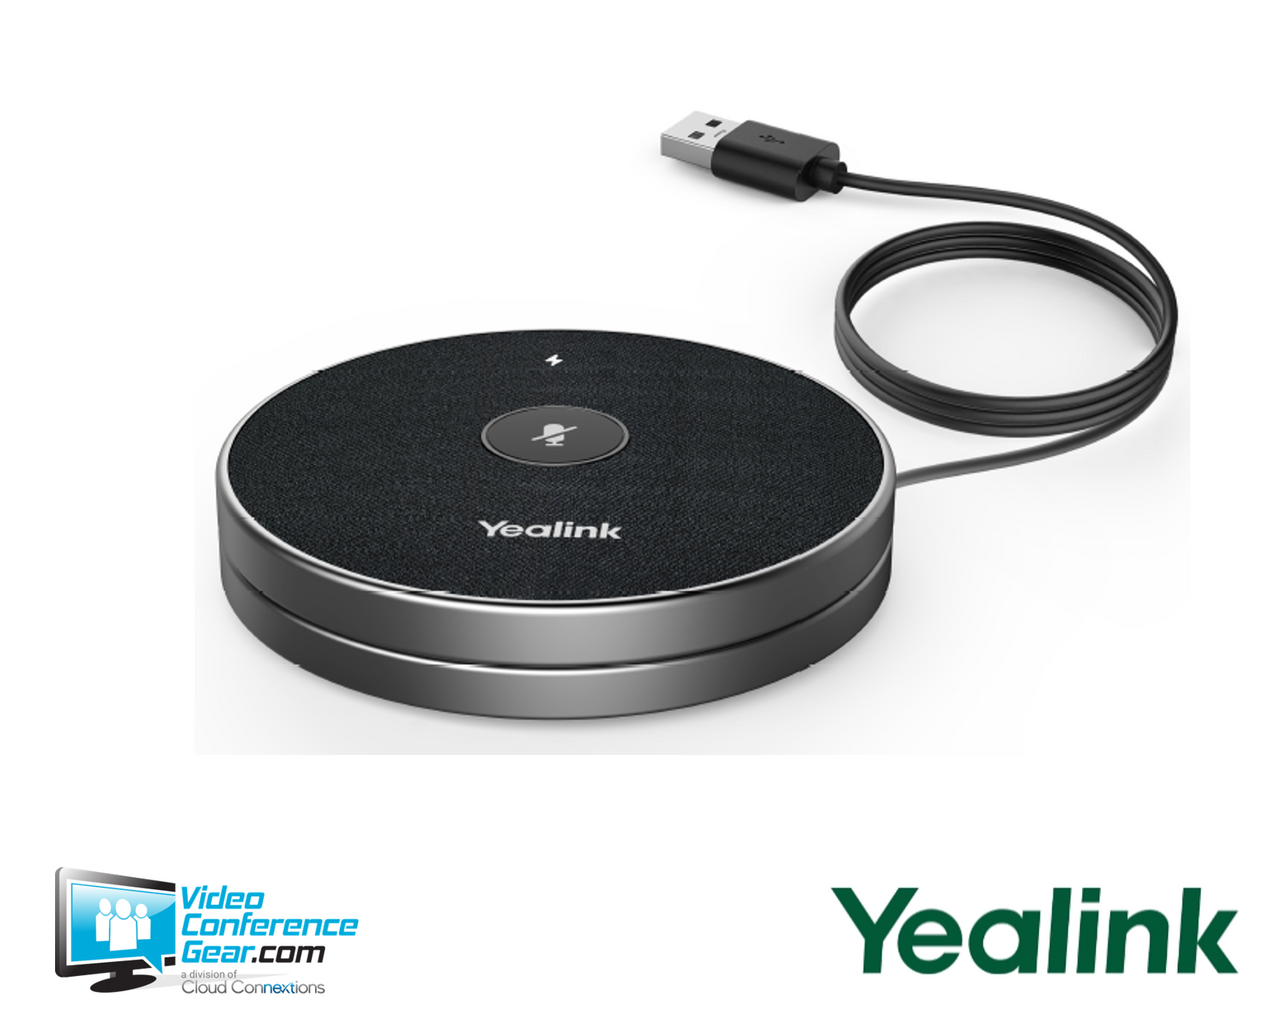 Yealink VCM36 Wireless Wifi Microphone for MeetingBar A20 and MeetingBar, A30 & other Yealink Systems